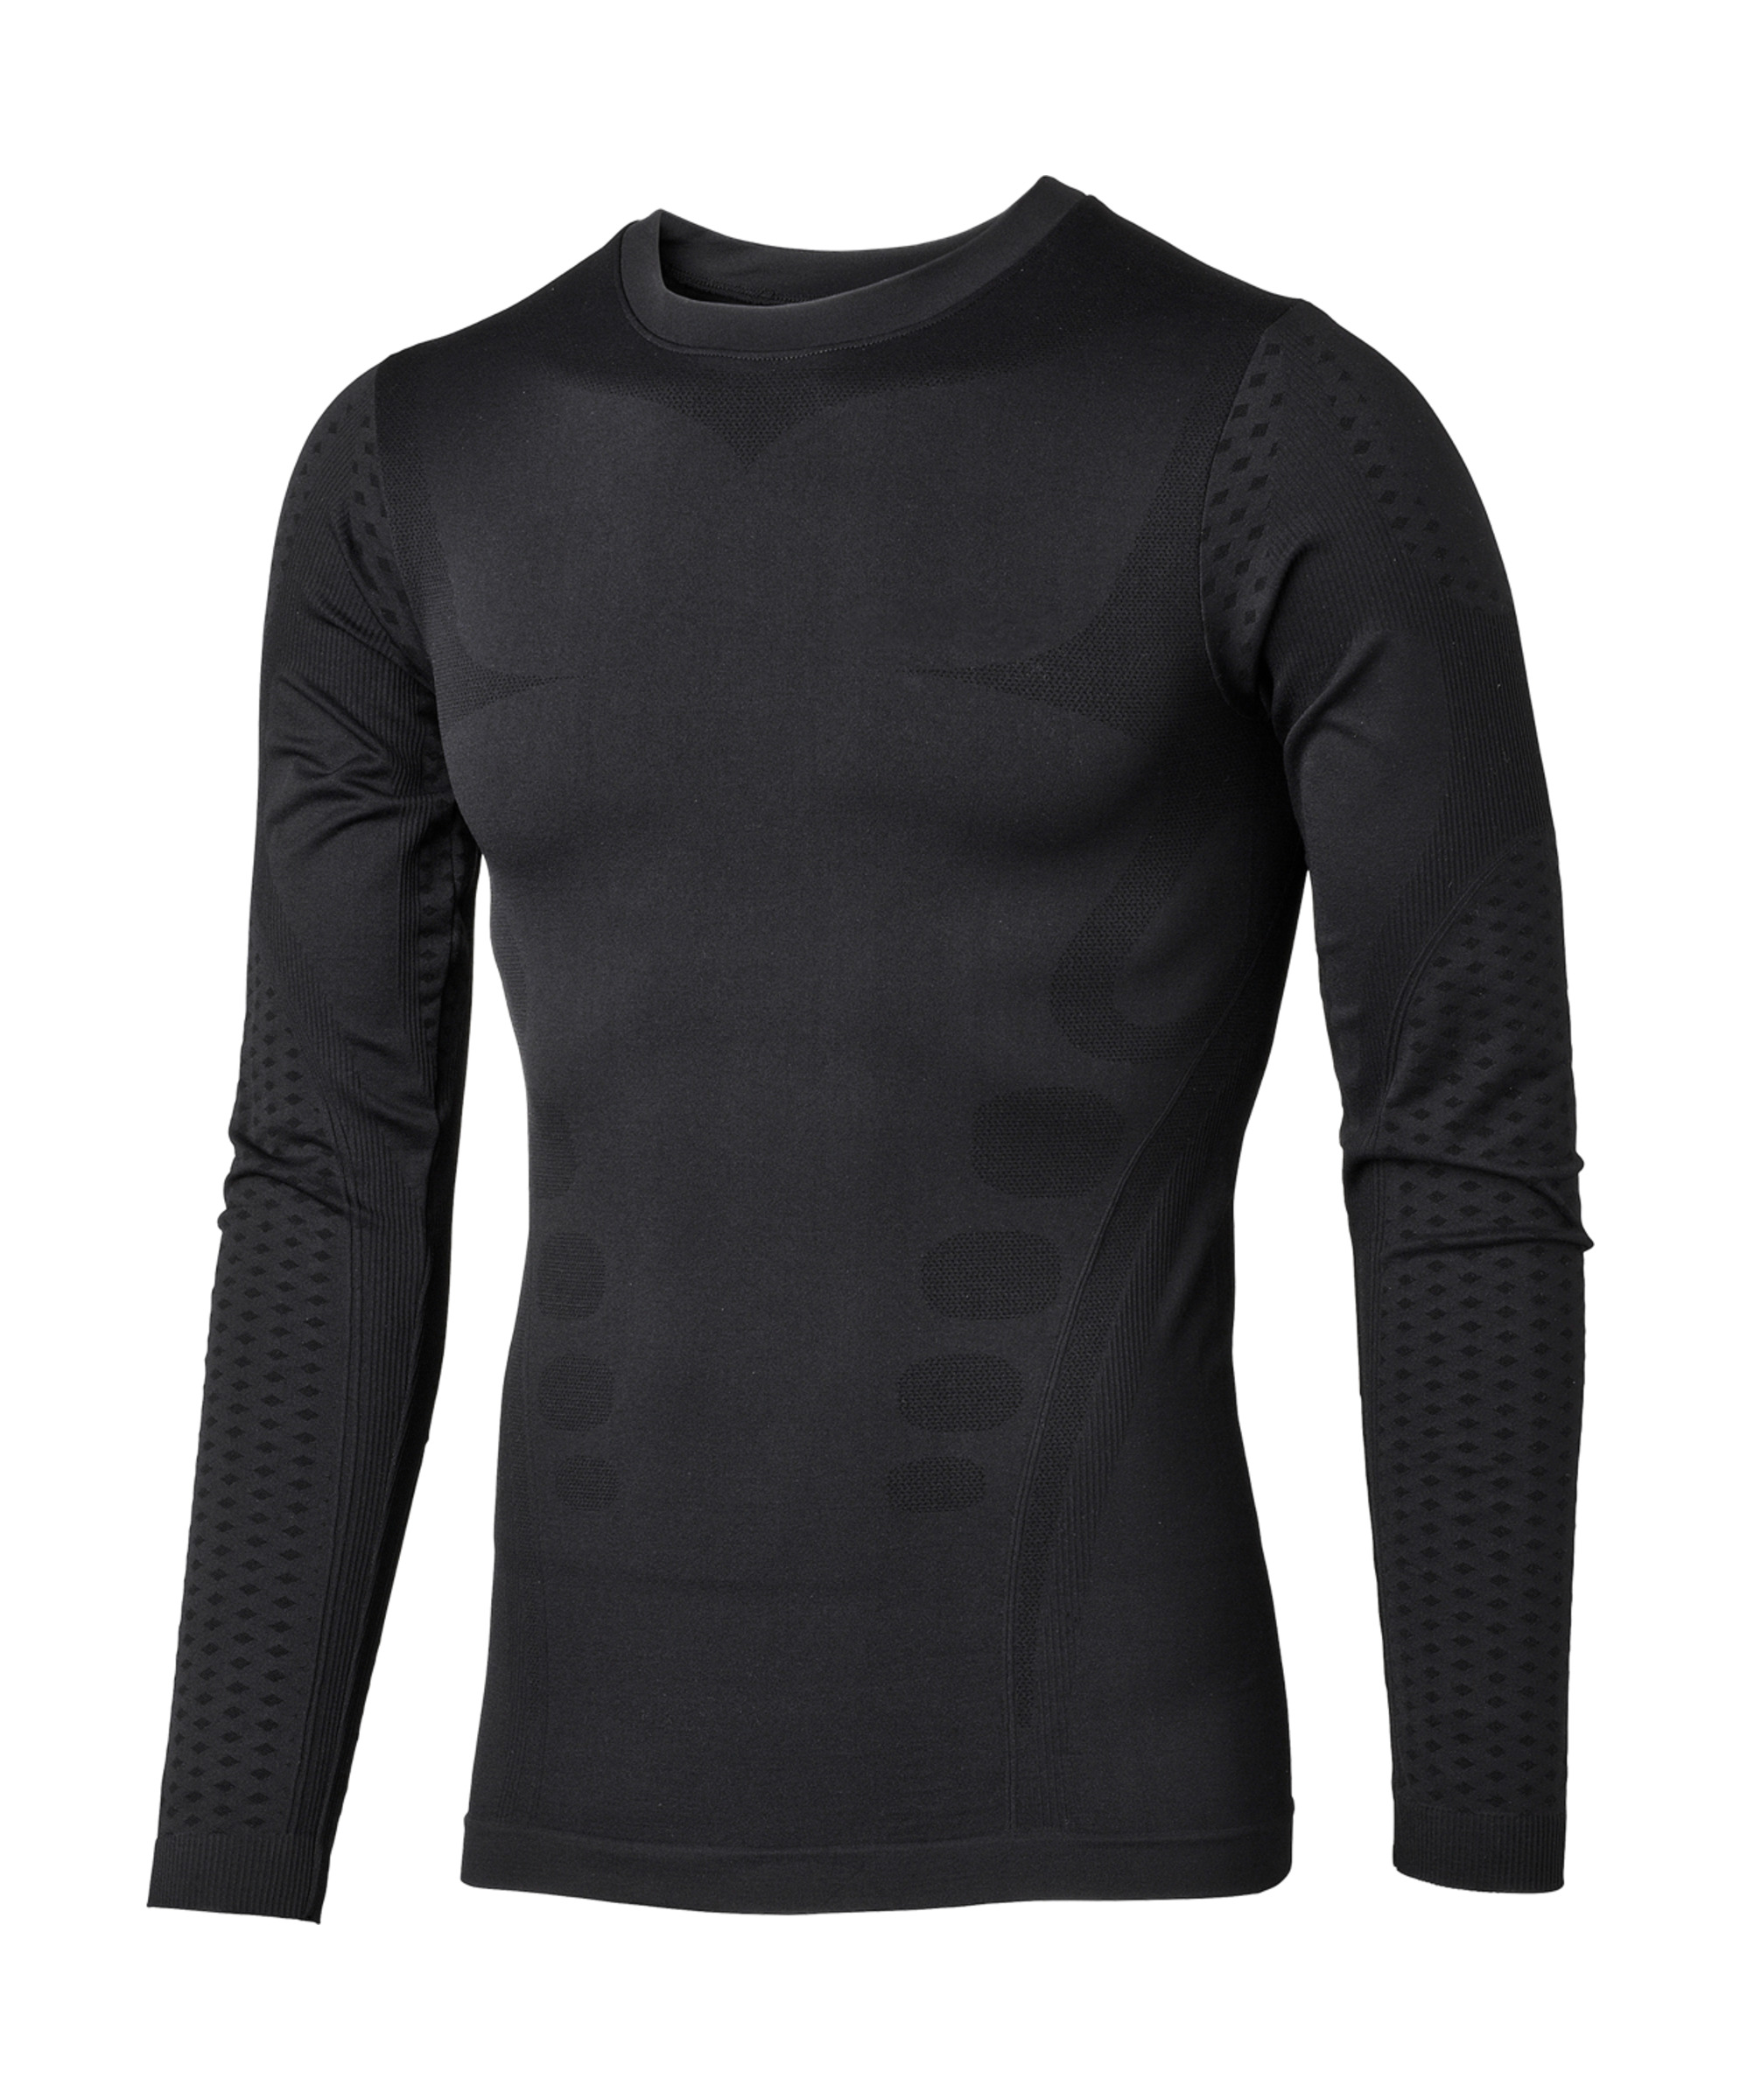 Top Swede 0505 Sweater Base Layer